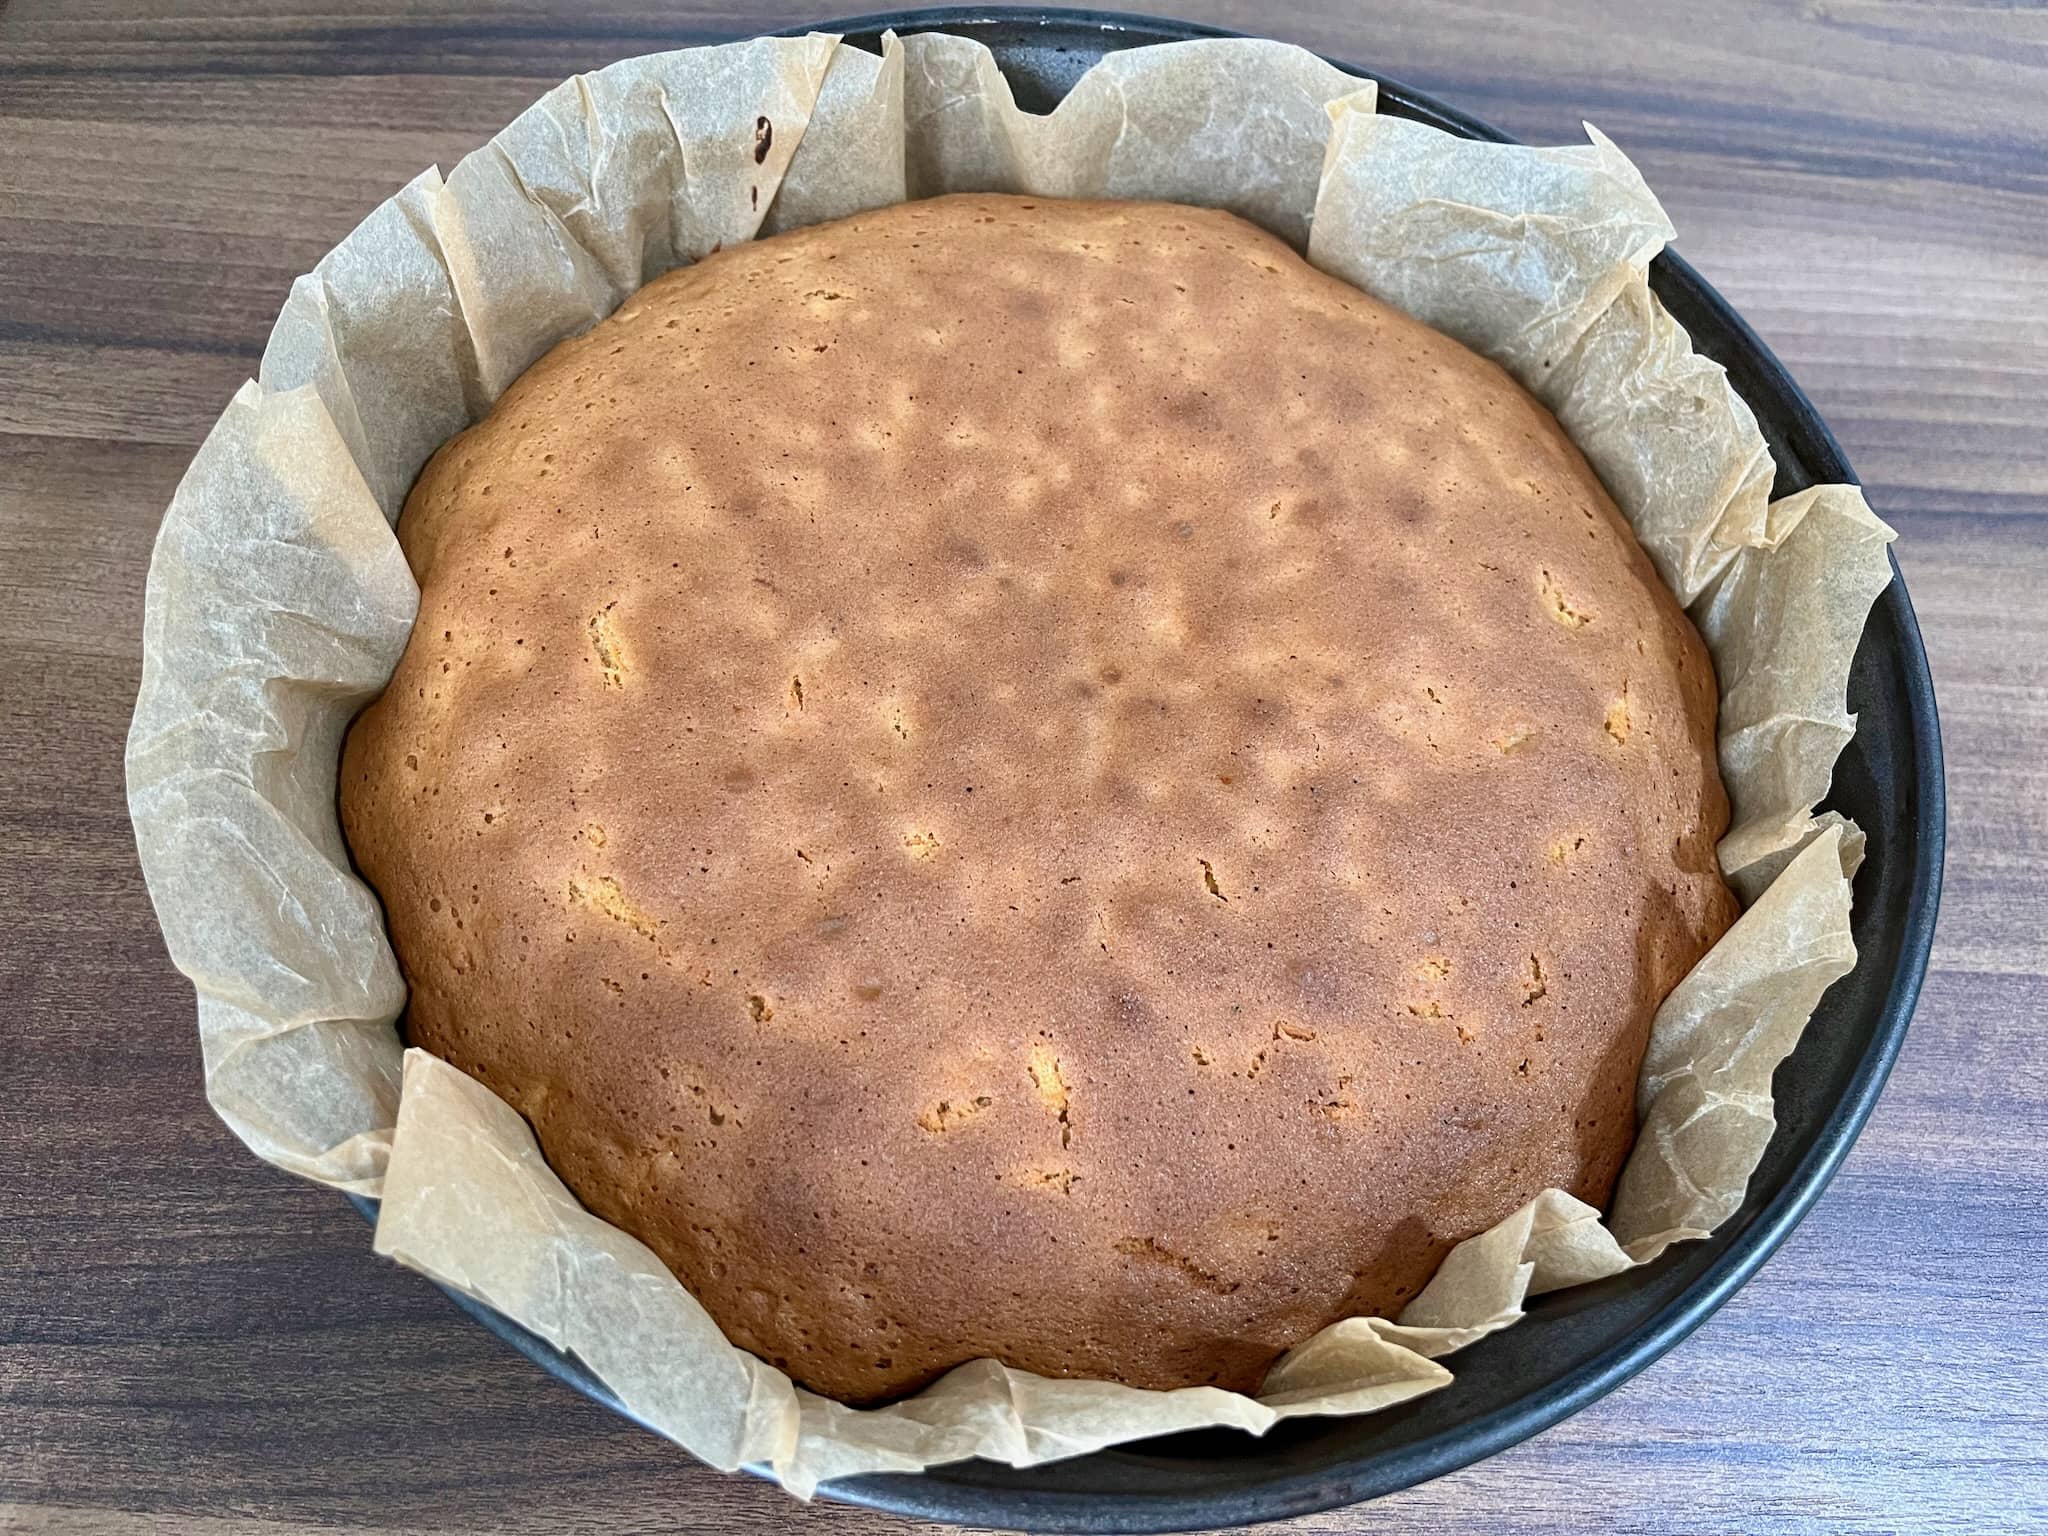 The carrot cake is in a pan, taken straight from the oven